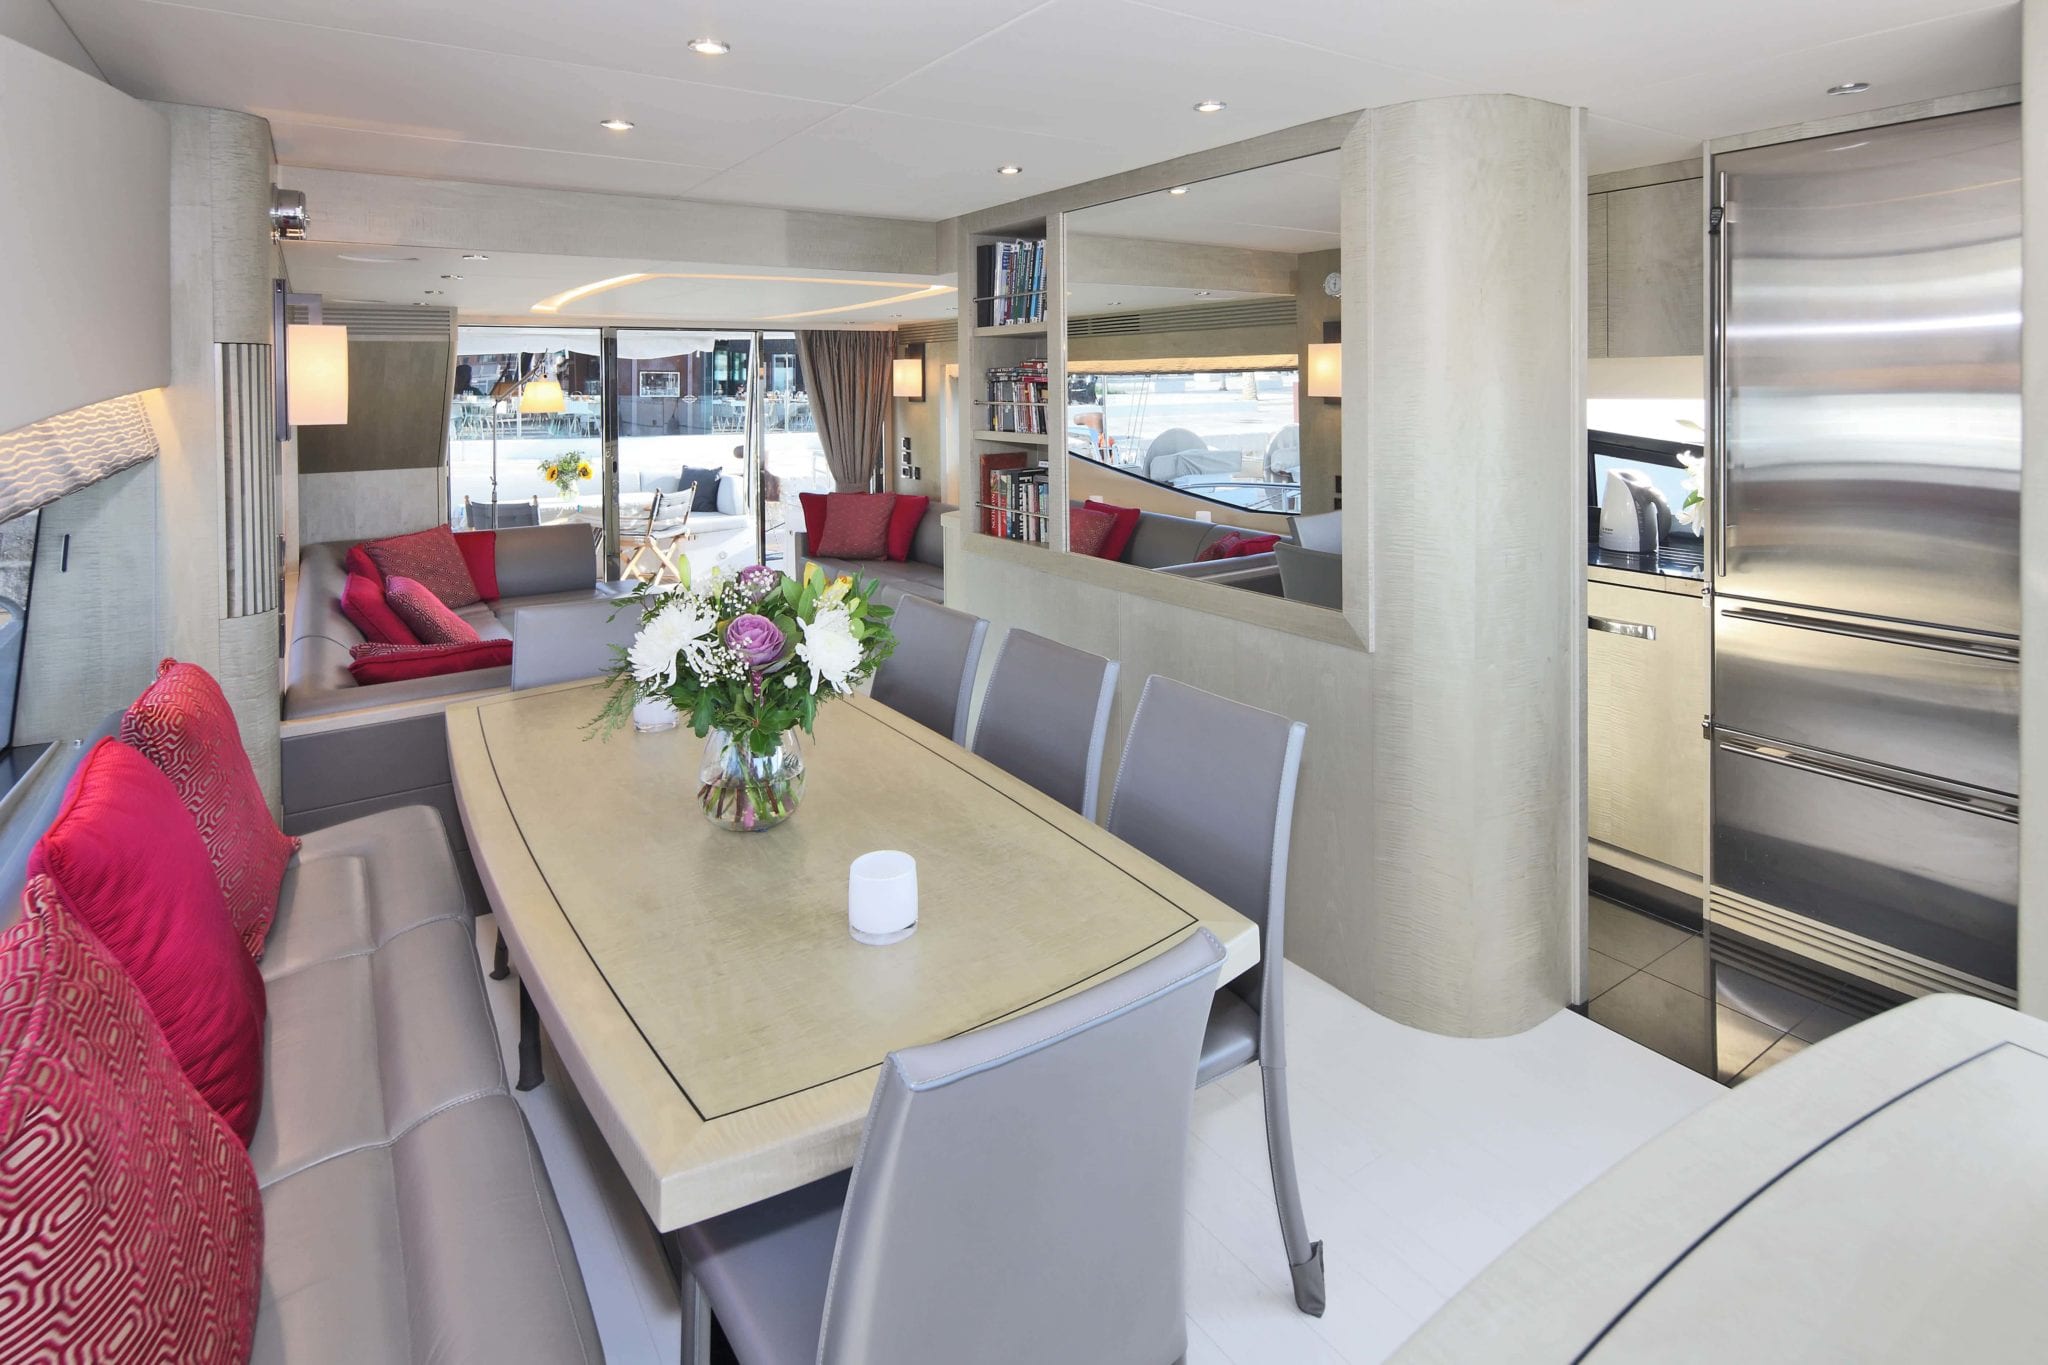 Explore the interior of the sunseeker yacht.